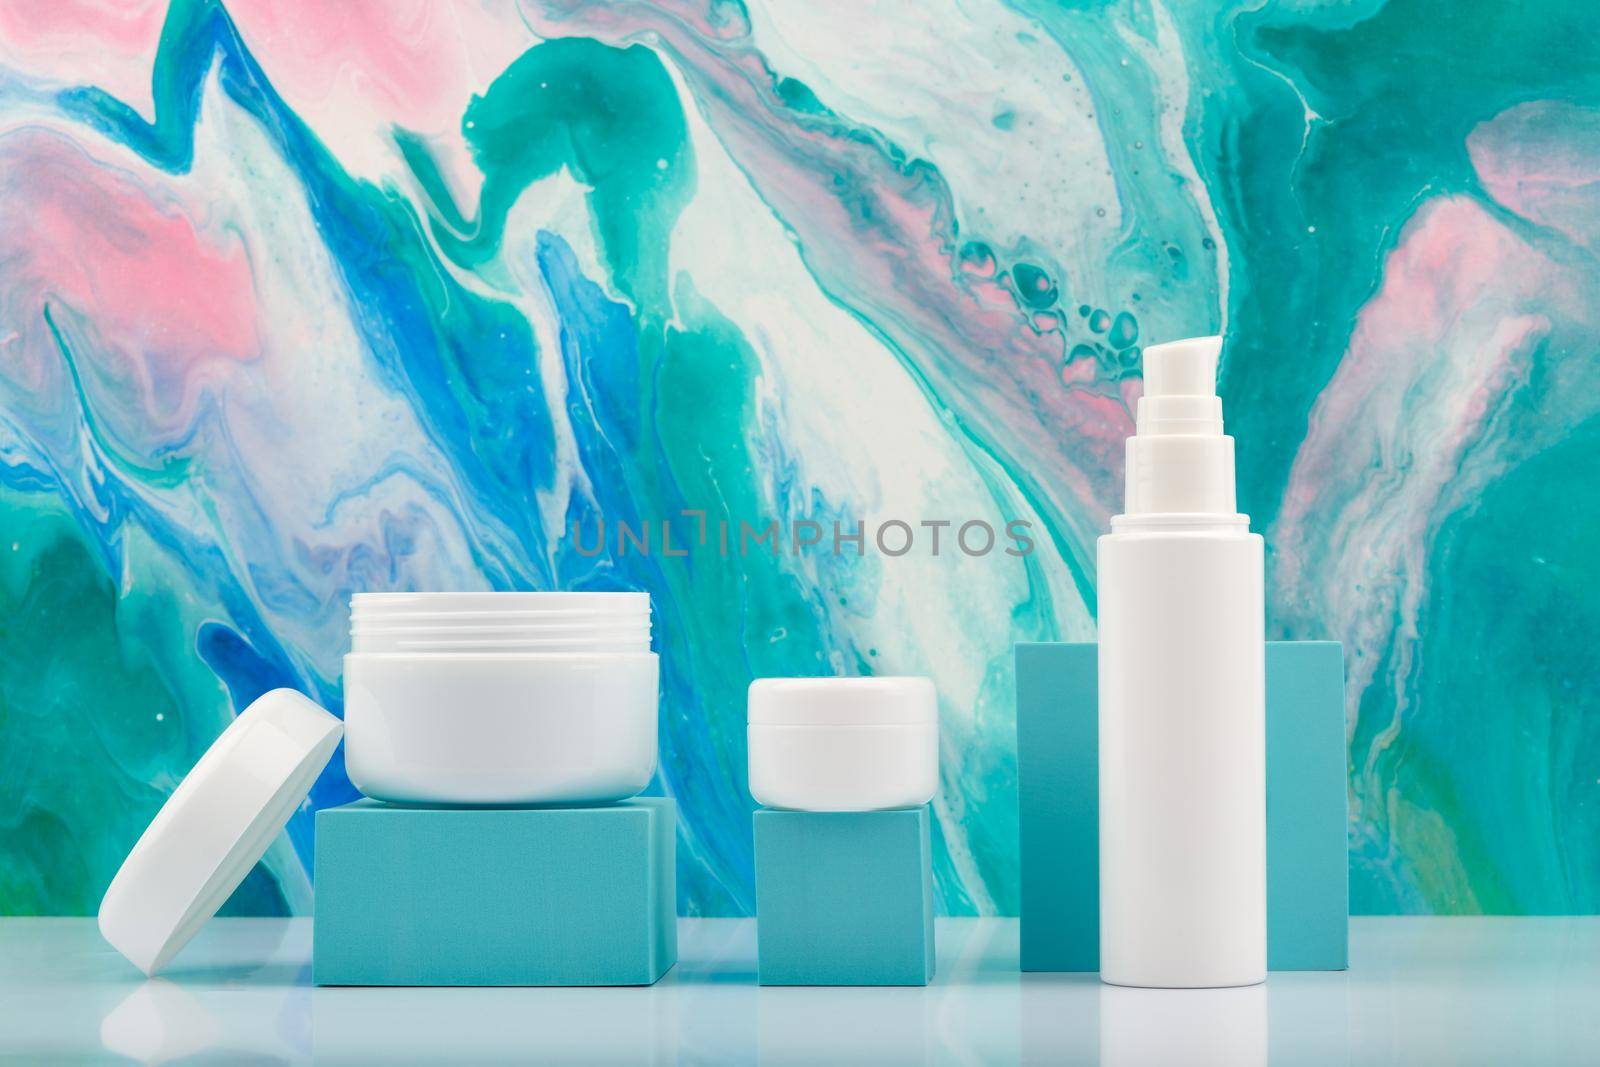 Opened cream jar and set of cosmetic creams for face, neck and under eye area on white table against blue marbled background. Concept of natural organic cosmetics and skin care